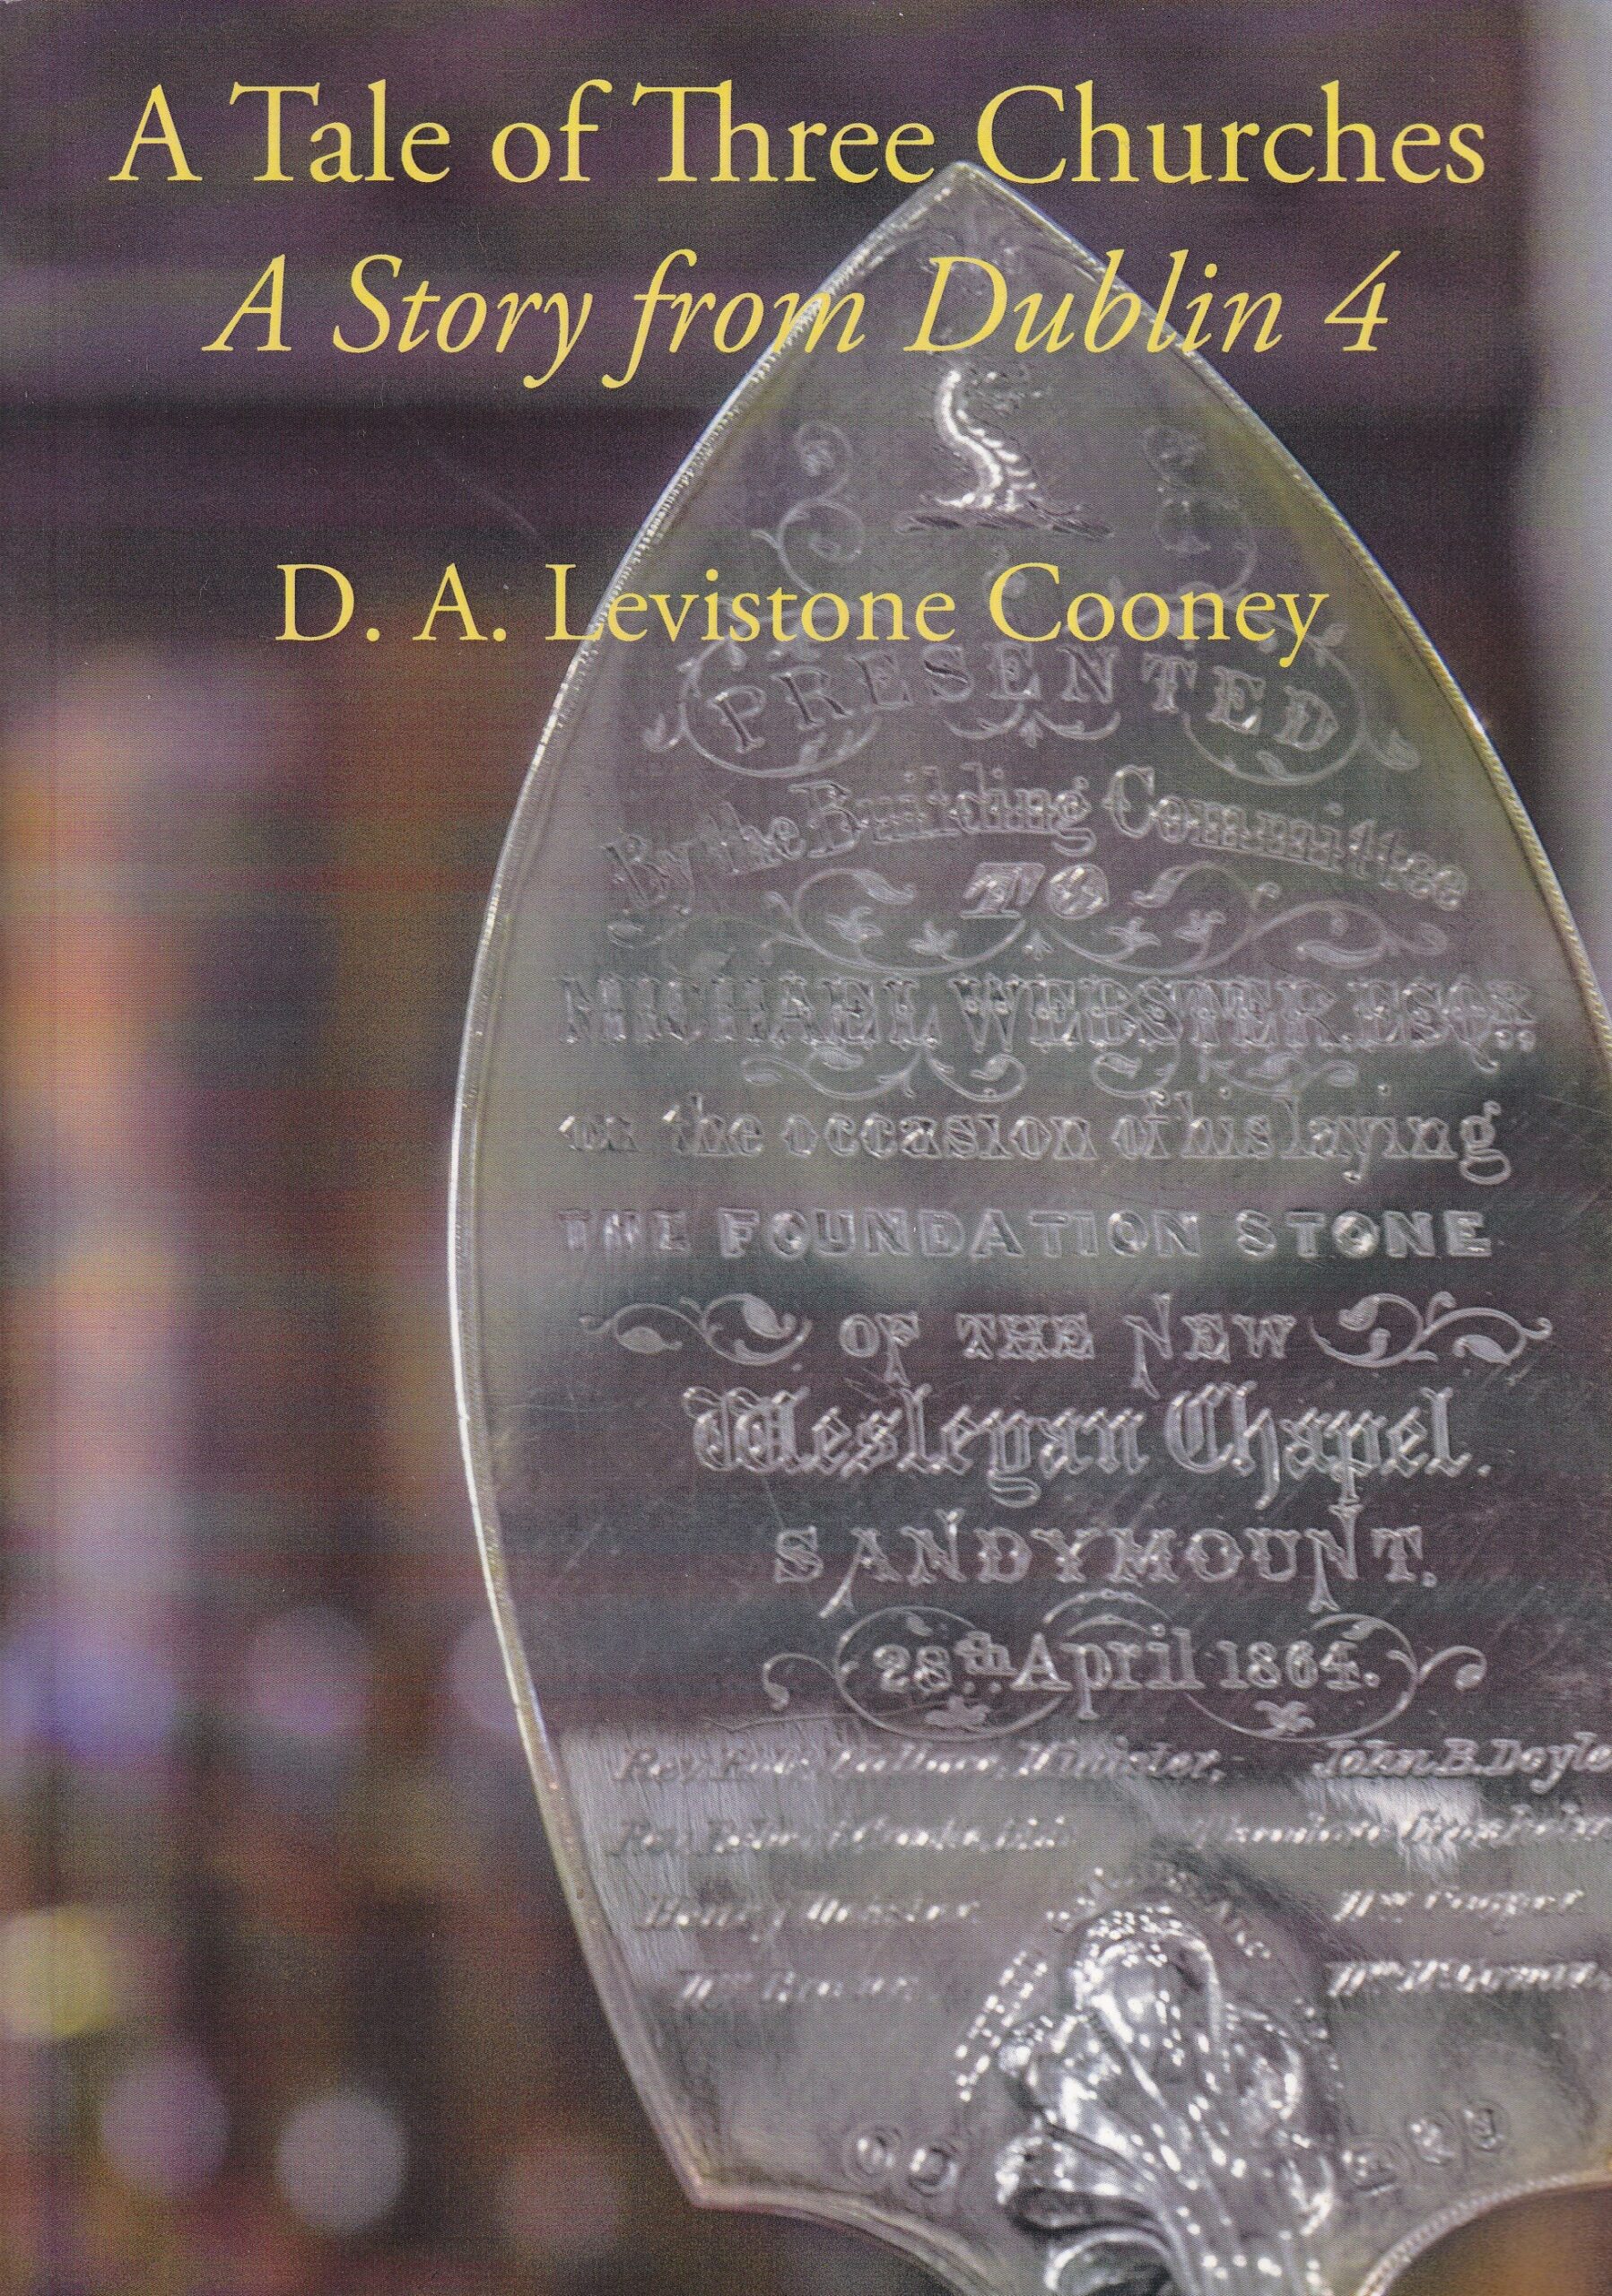 A Tale of Three Churches: A Story from Dublin 4 by D.A. Levistone Cooney